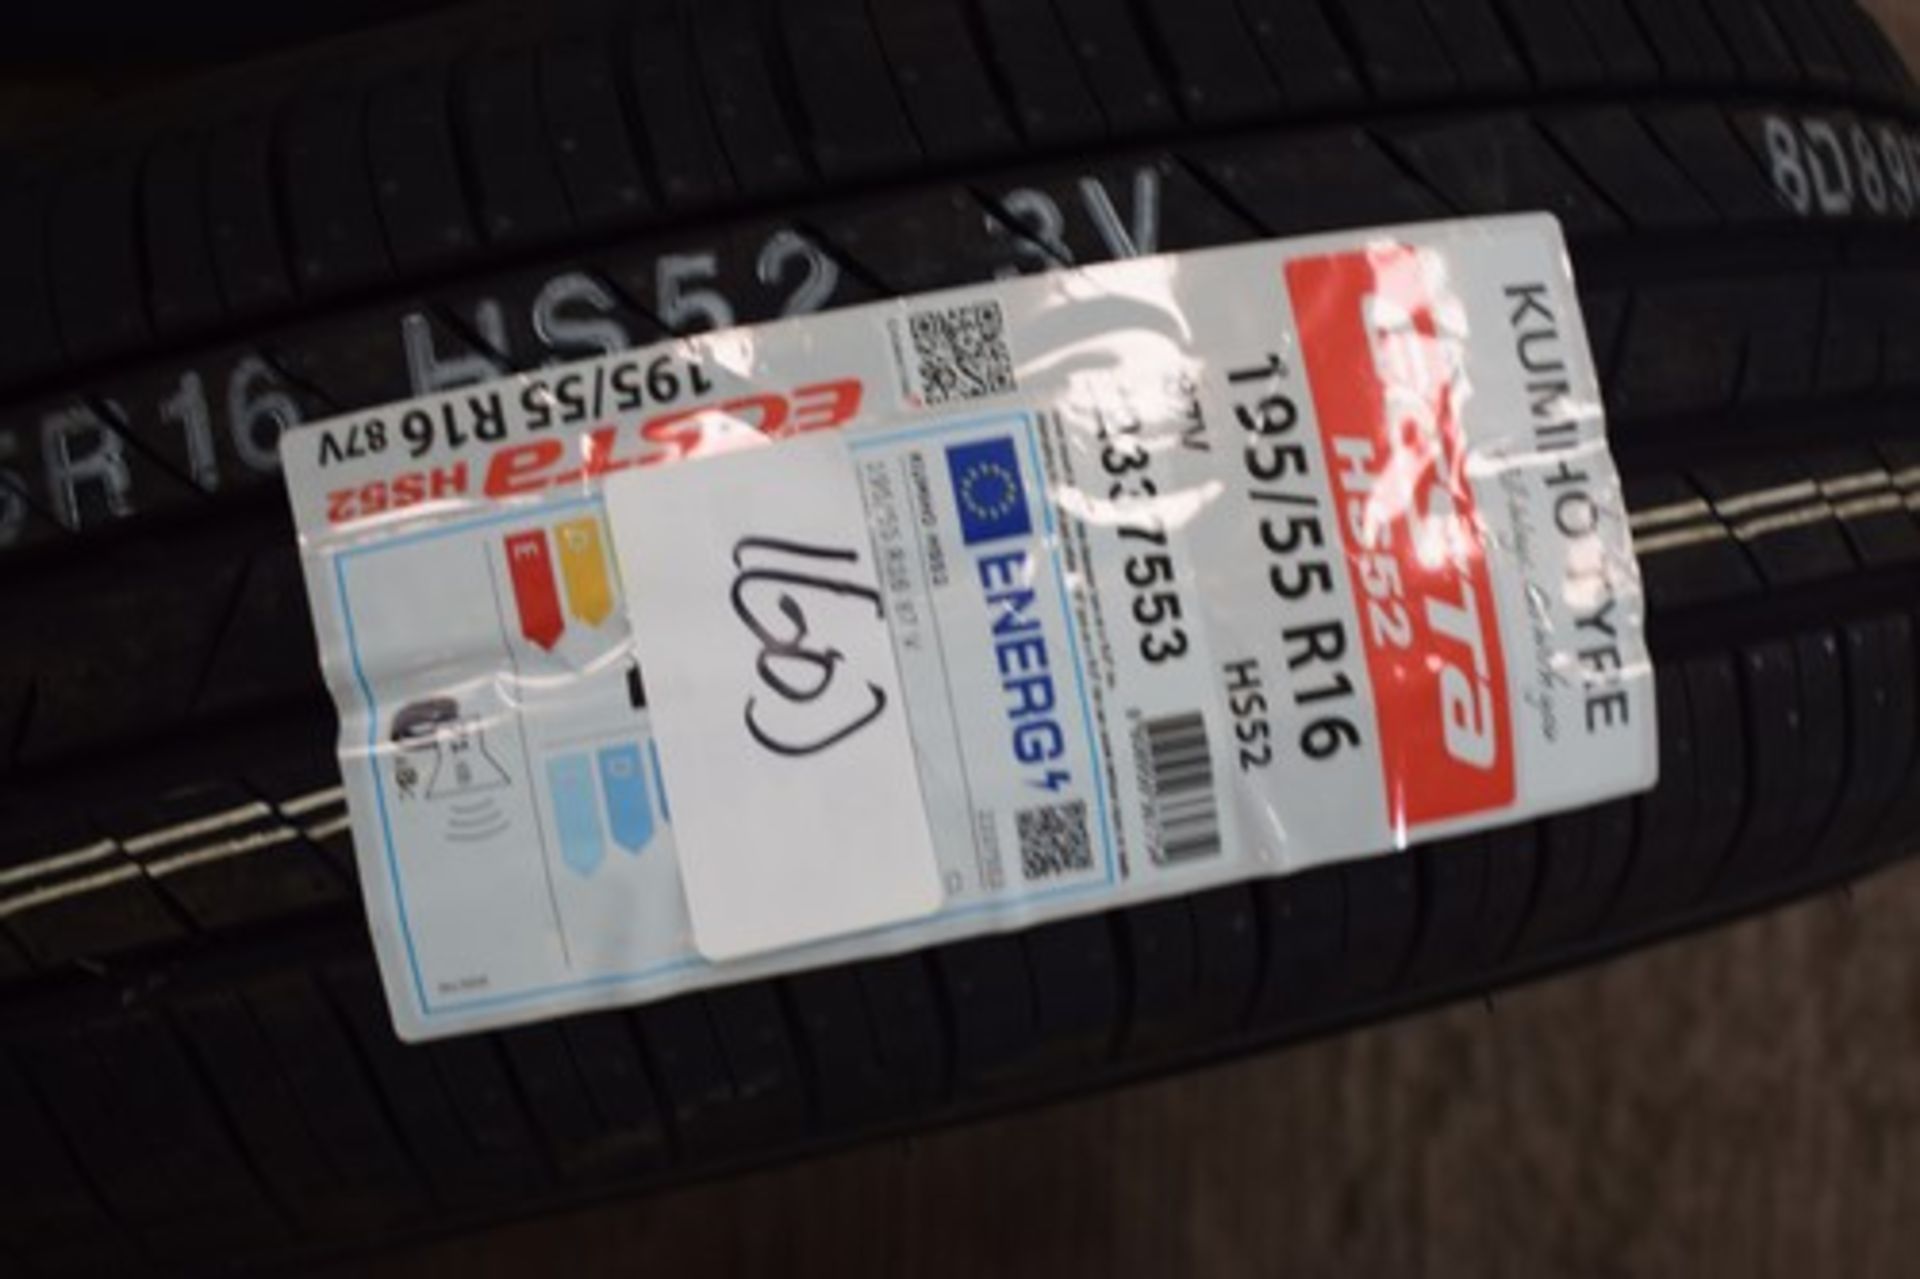 1 x Kumho Ecsta HS52 tyre, size 195/55 R16 87V - new with label (C5)(60)